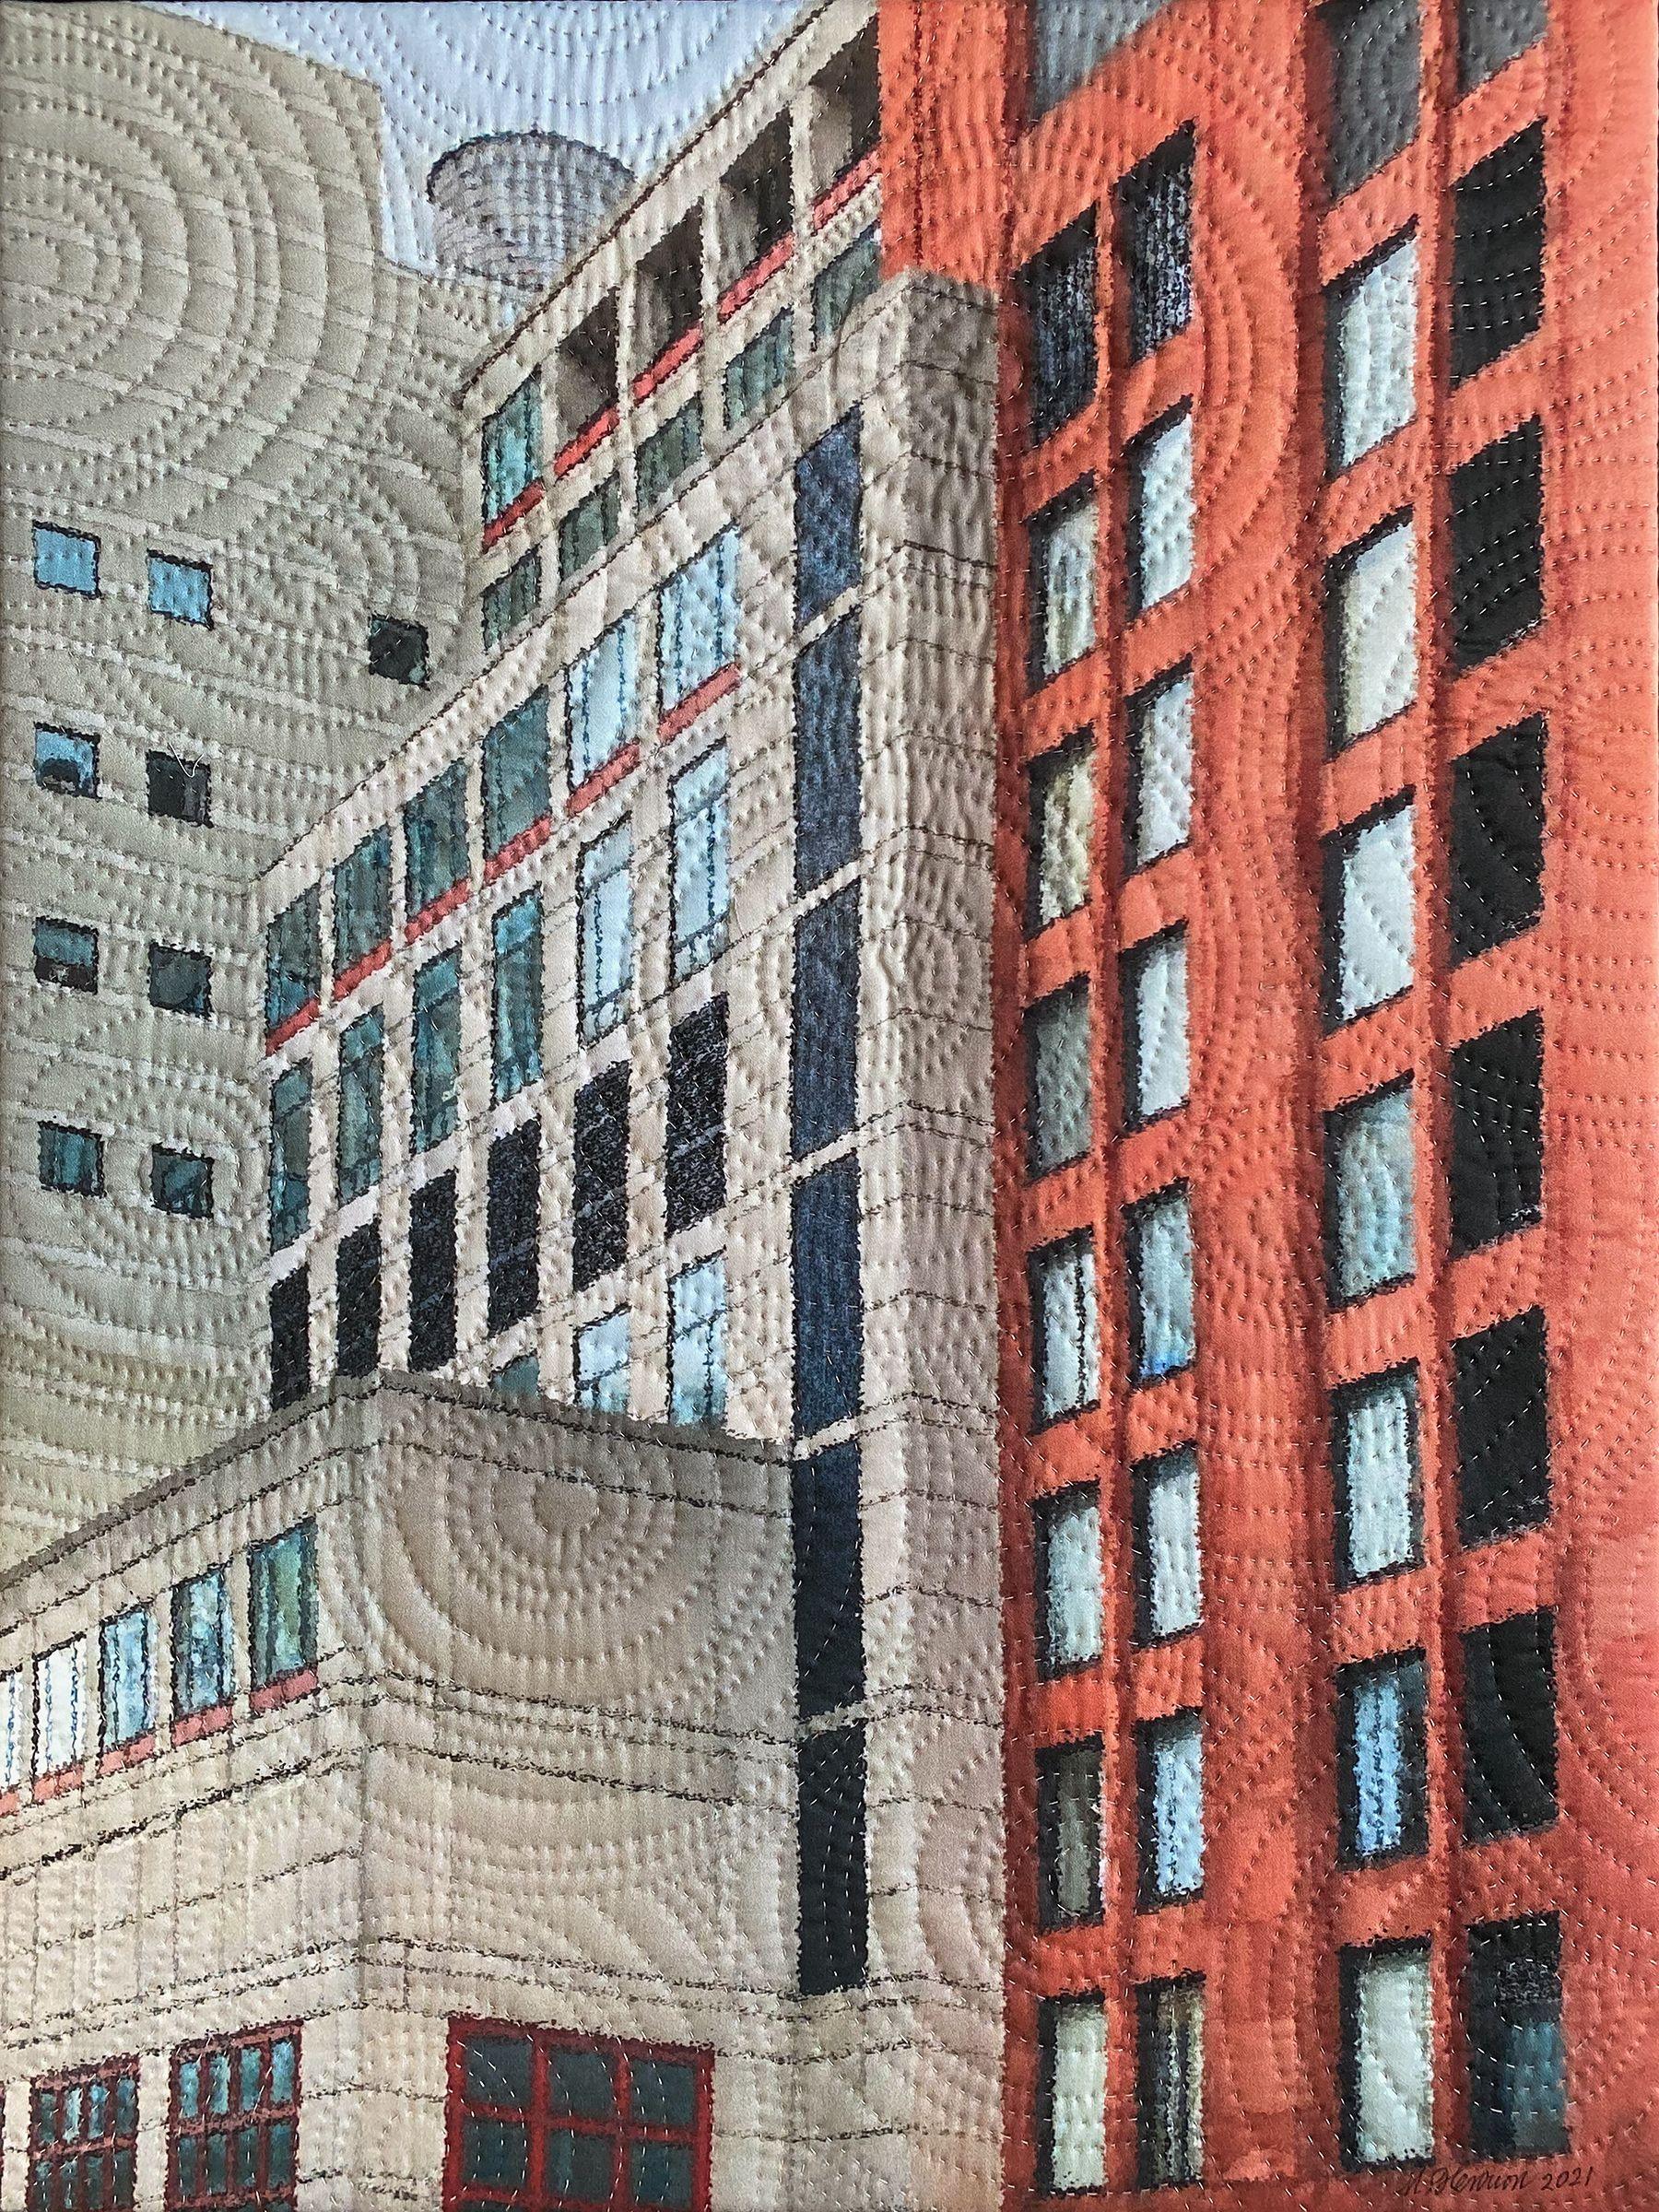 West 3rd Street, NYC, Mixed Media on Canvas - Mixed Media Art by Marilyn Henrion